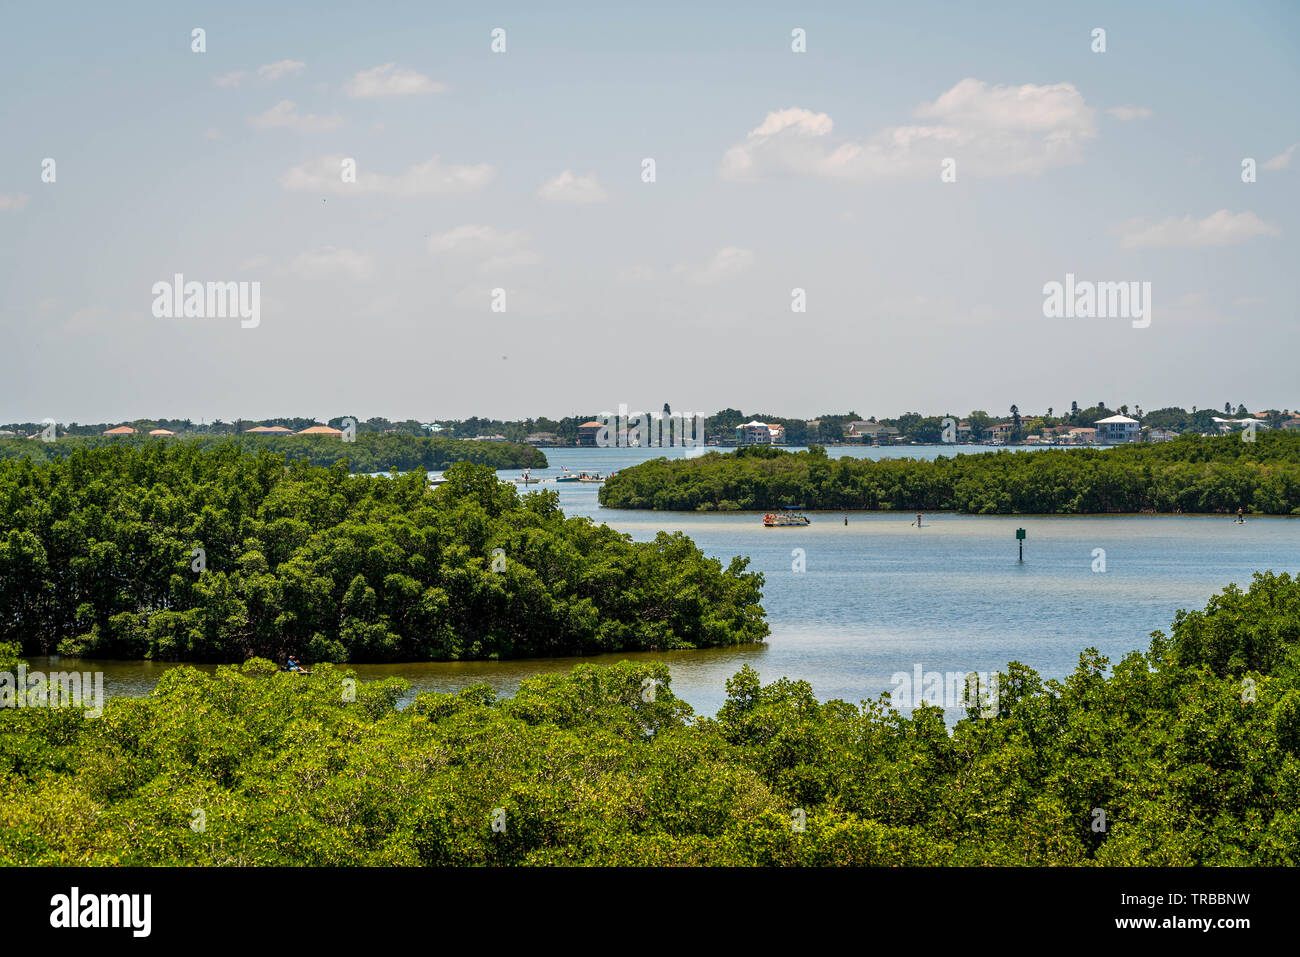 A look at some of the magnificent sights to see in Weeden Island Preserve. Stock Photo